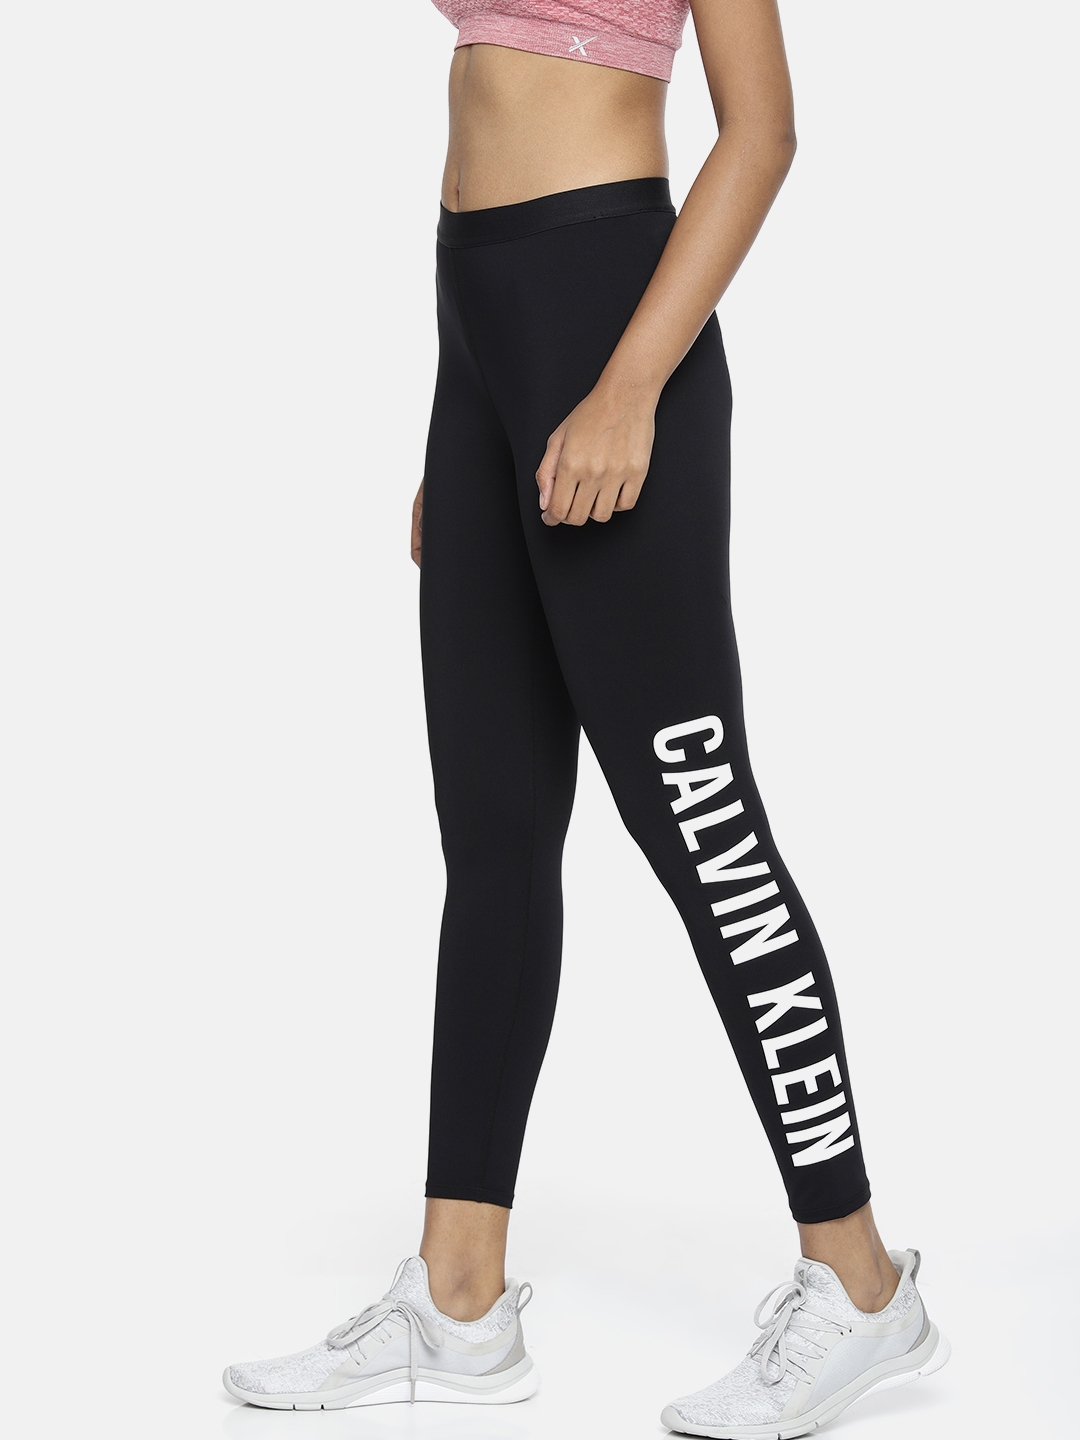 Buy Calvin Klein Jeans Women Black Printed Side Logo Print Cropped Tights -  Tights for Women 9197223